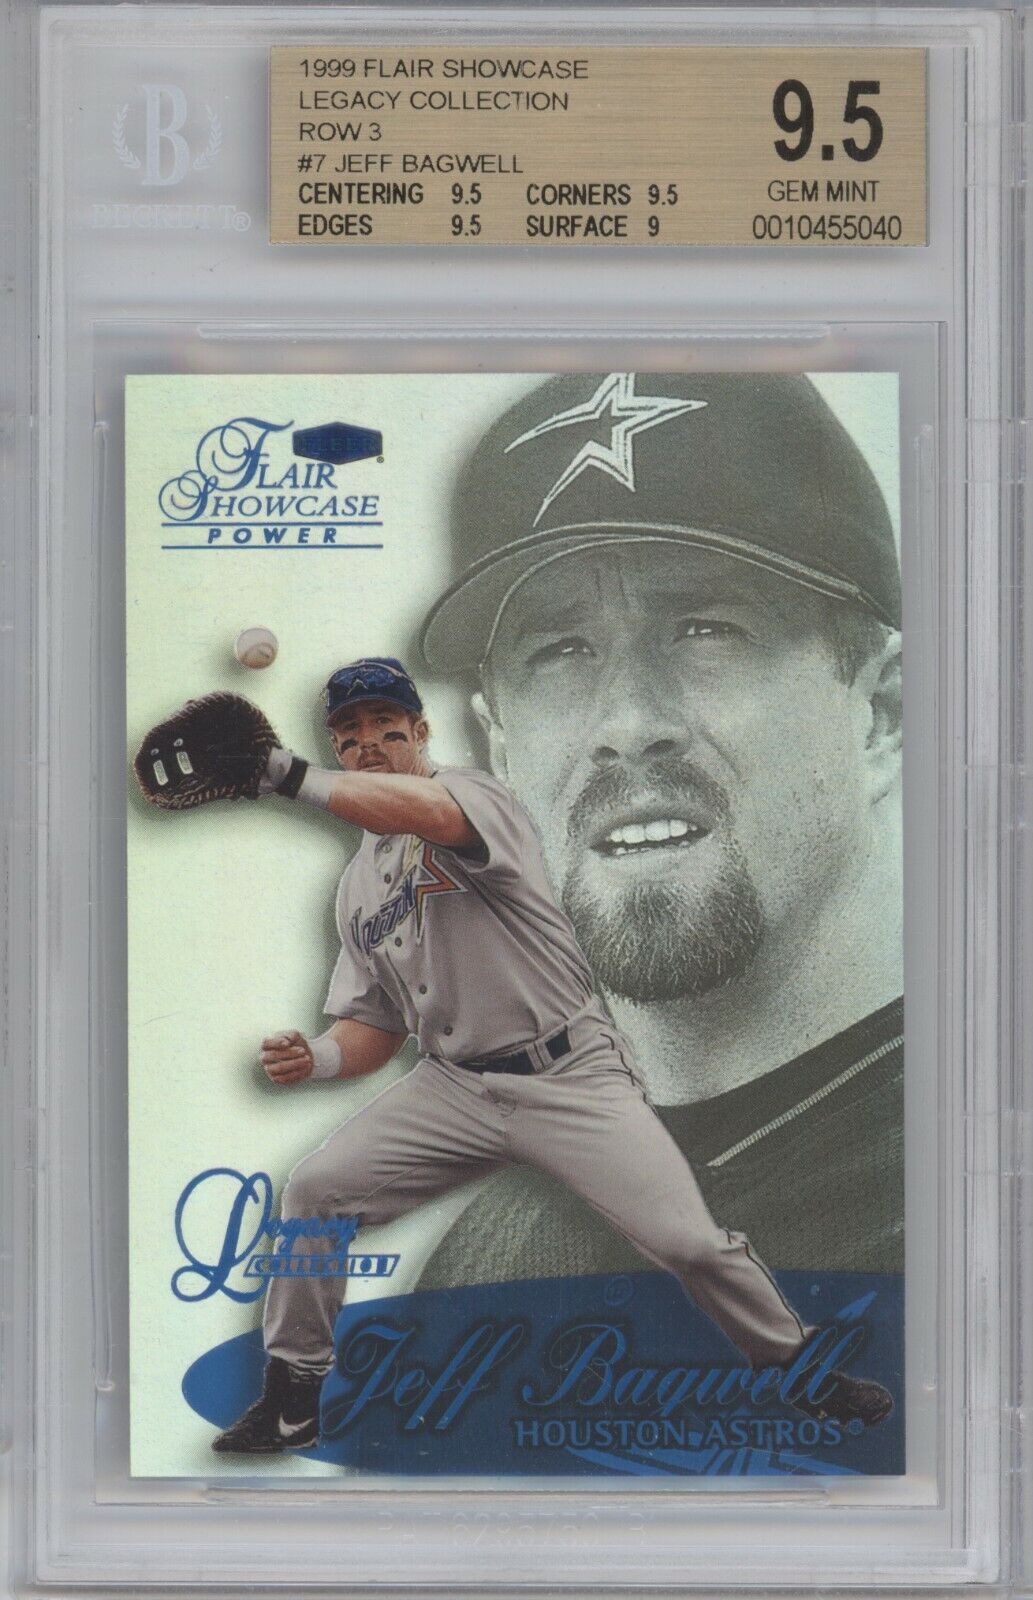 JEFF BAGWELL 1999 FLAIR SHOWCASE LEGACY COLLECTION ROW 2 /99 #7 BGS 9.5 